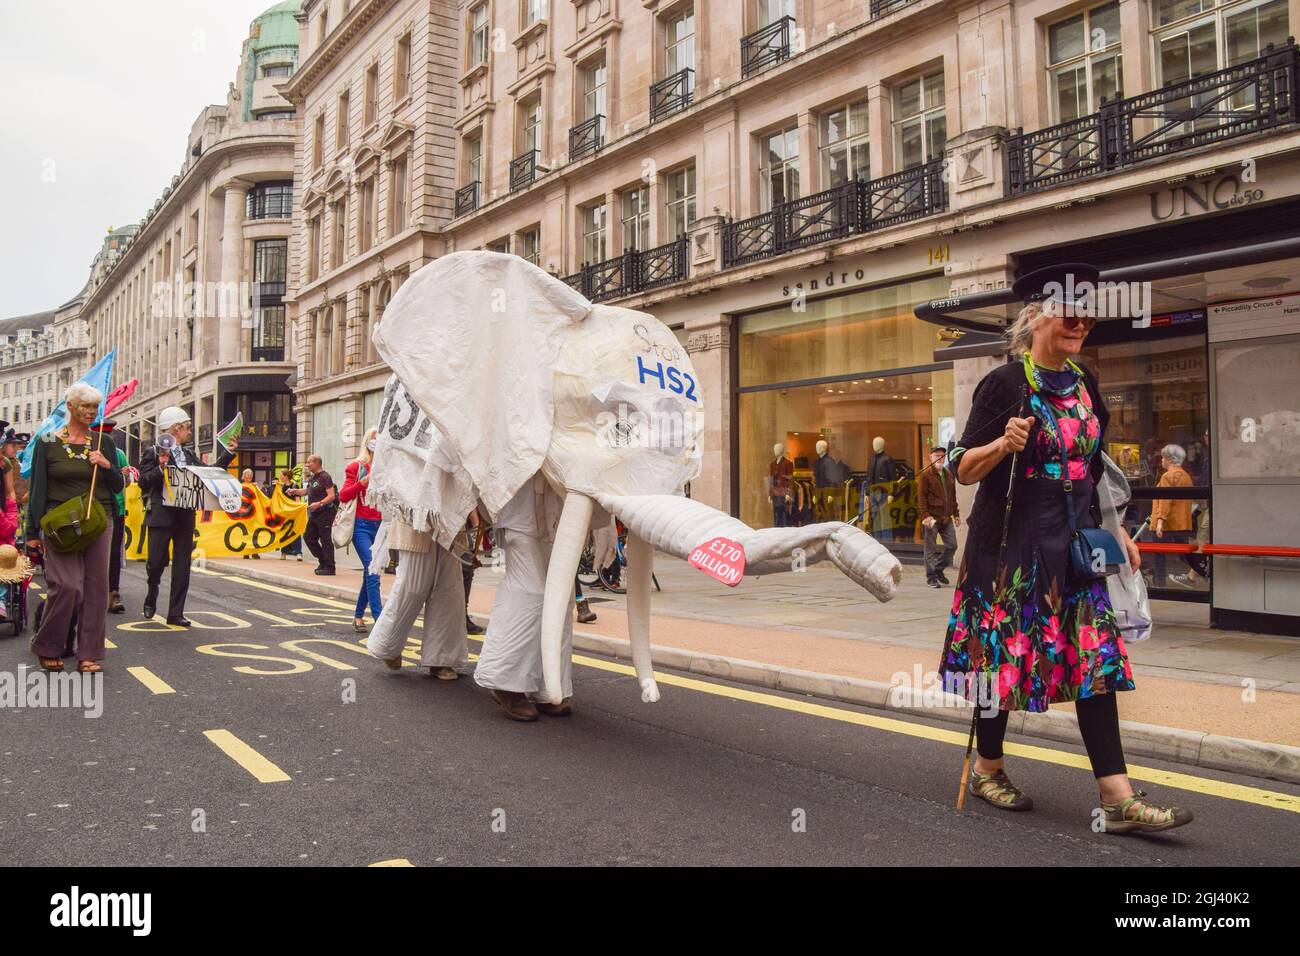 Protesters wear a white elephant costume in opposition to HS2 (High Speed 2 railway system) during the demonstration in Regent Street.Extinction Rebellion protesters staged the March For Nature on the final day of their two-week Impossible Rebellion campaign, calling on the UK Government to act meaningfully on the climate and ecological crisis. (Photo by Vuk Valcic / SOPA Images/Sipa USA) Stock Photo